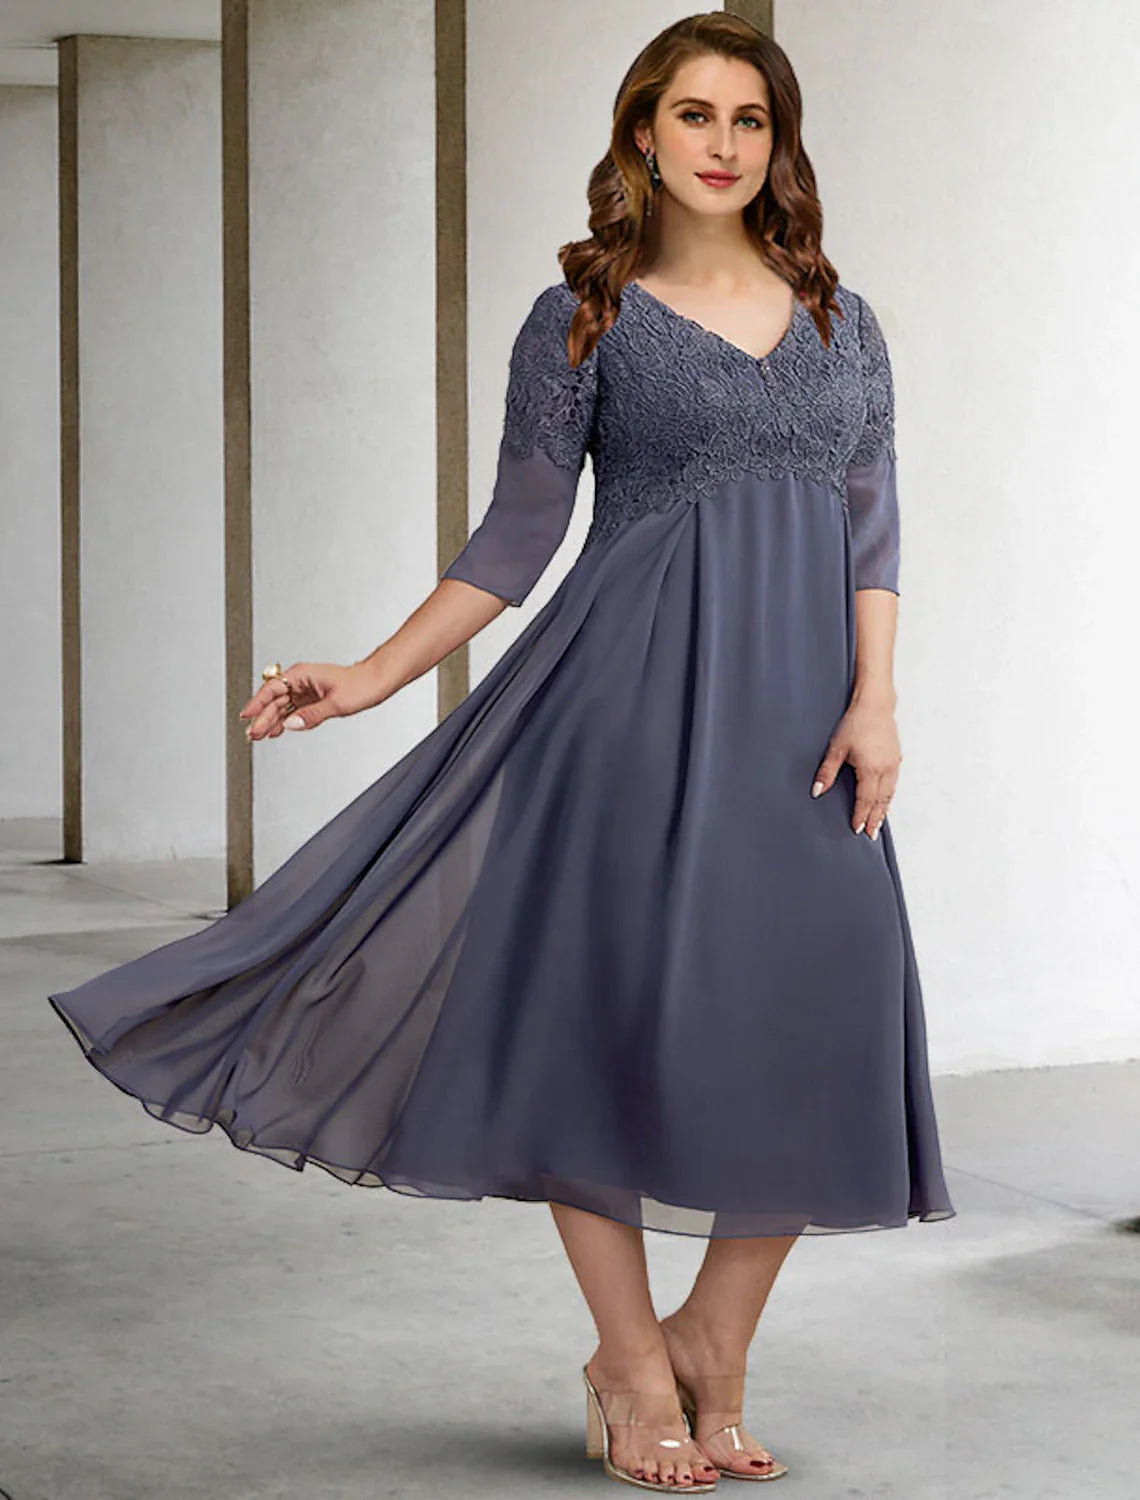 A-Line Mother of the Bride Dresses Plus Size Hide Belly Curve Elegant Dress Formal Tea Length Half Sleeve V Neck Chiffon with Buttons Appliques Fall